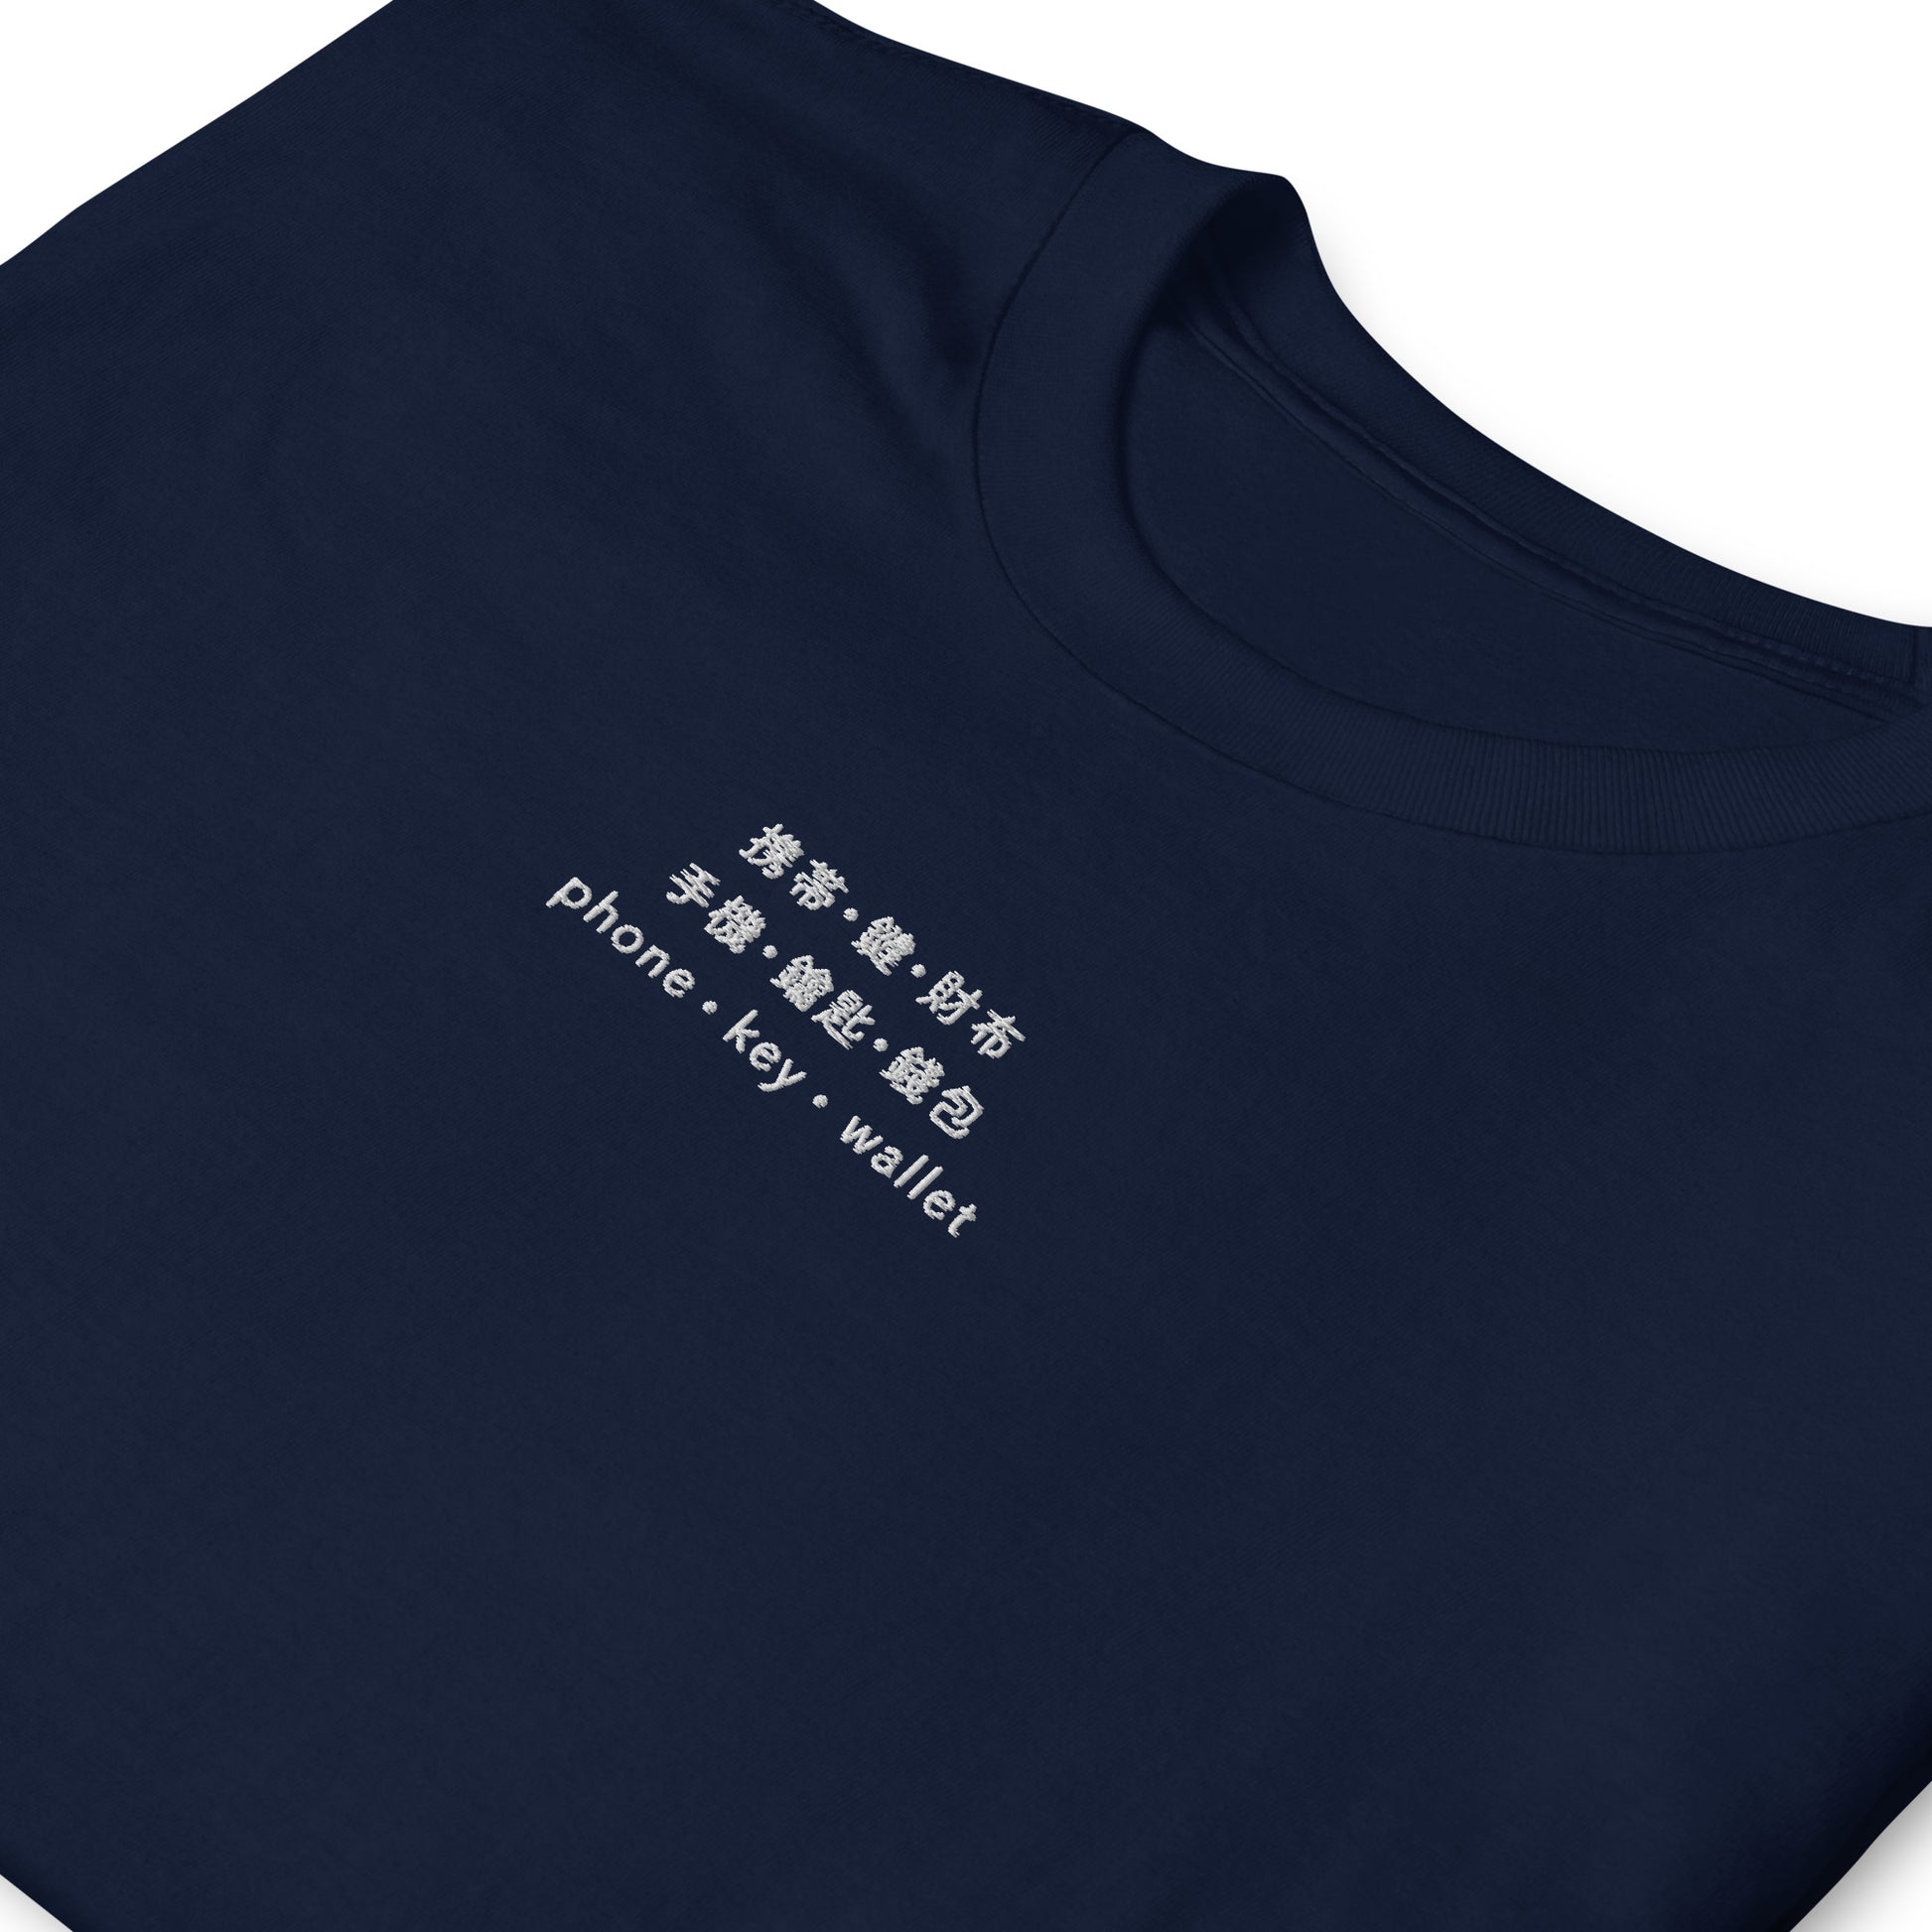 Navy High Quality Tee - Front Design with an White Embroidery "Phone/Key/Wallet" in Japanese,Chinese and English